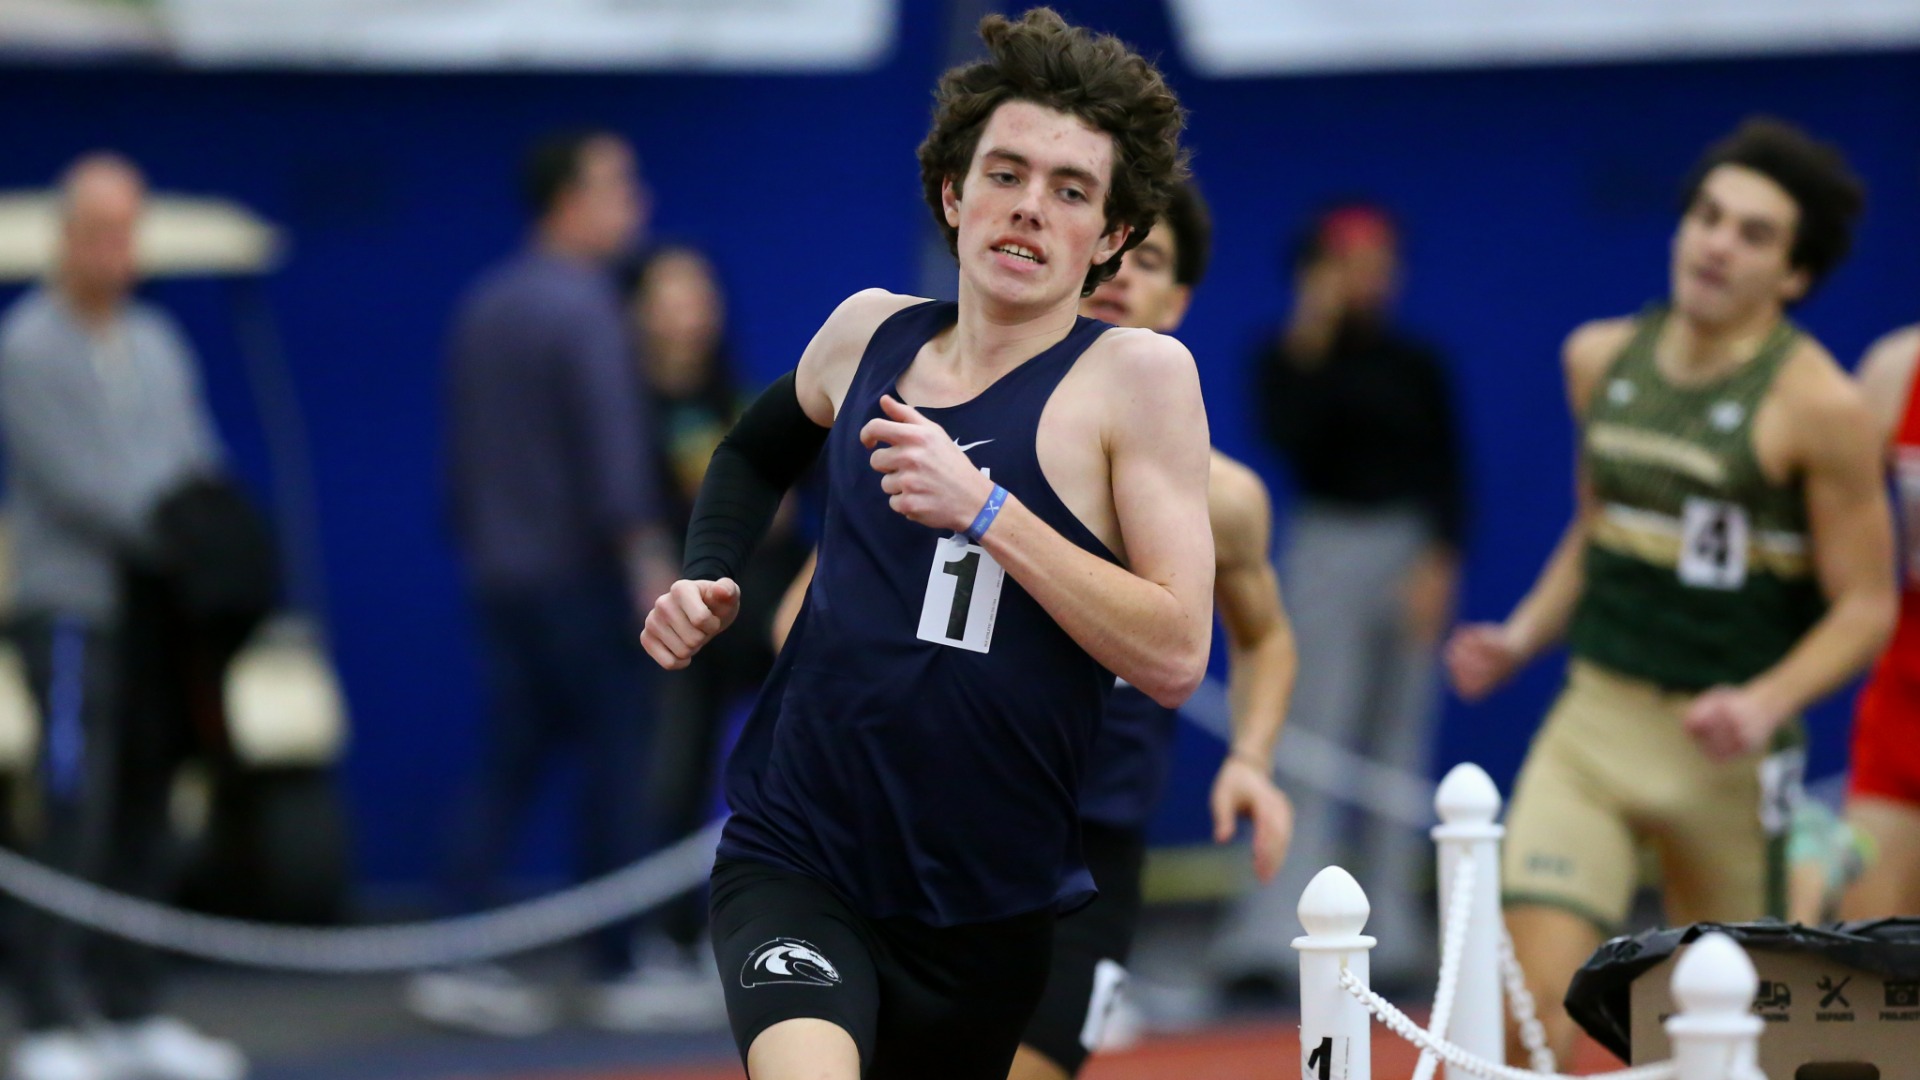 CBASlide 2 - INDOOR TRACK DOMINANT IN 26TH STATE CHAMPIONSHIP WIN